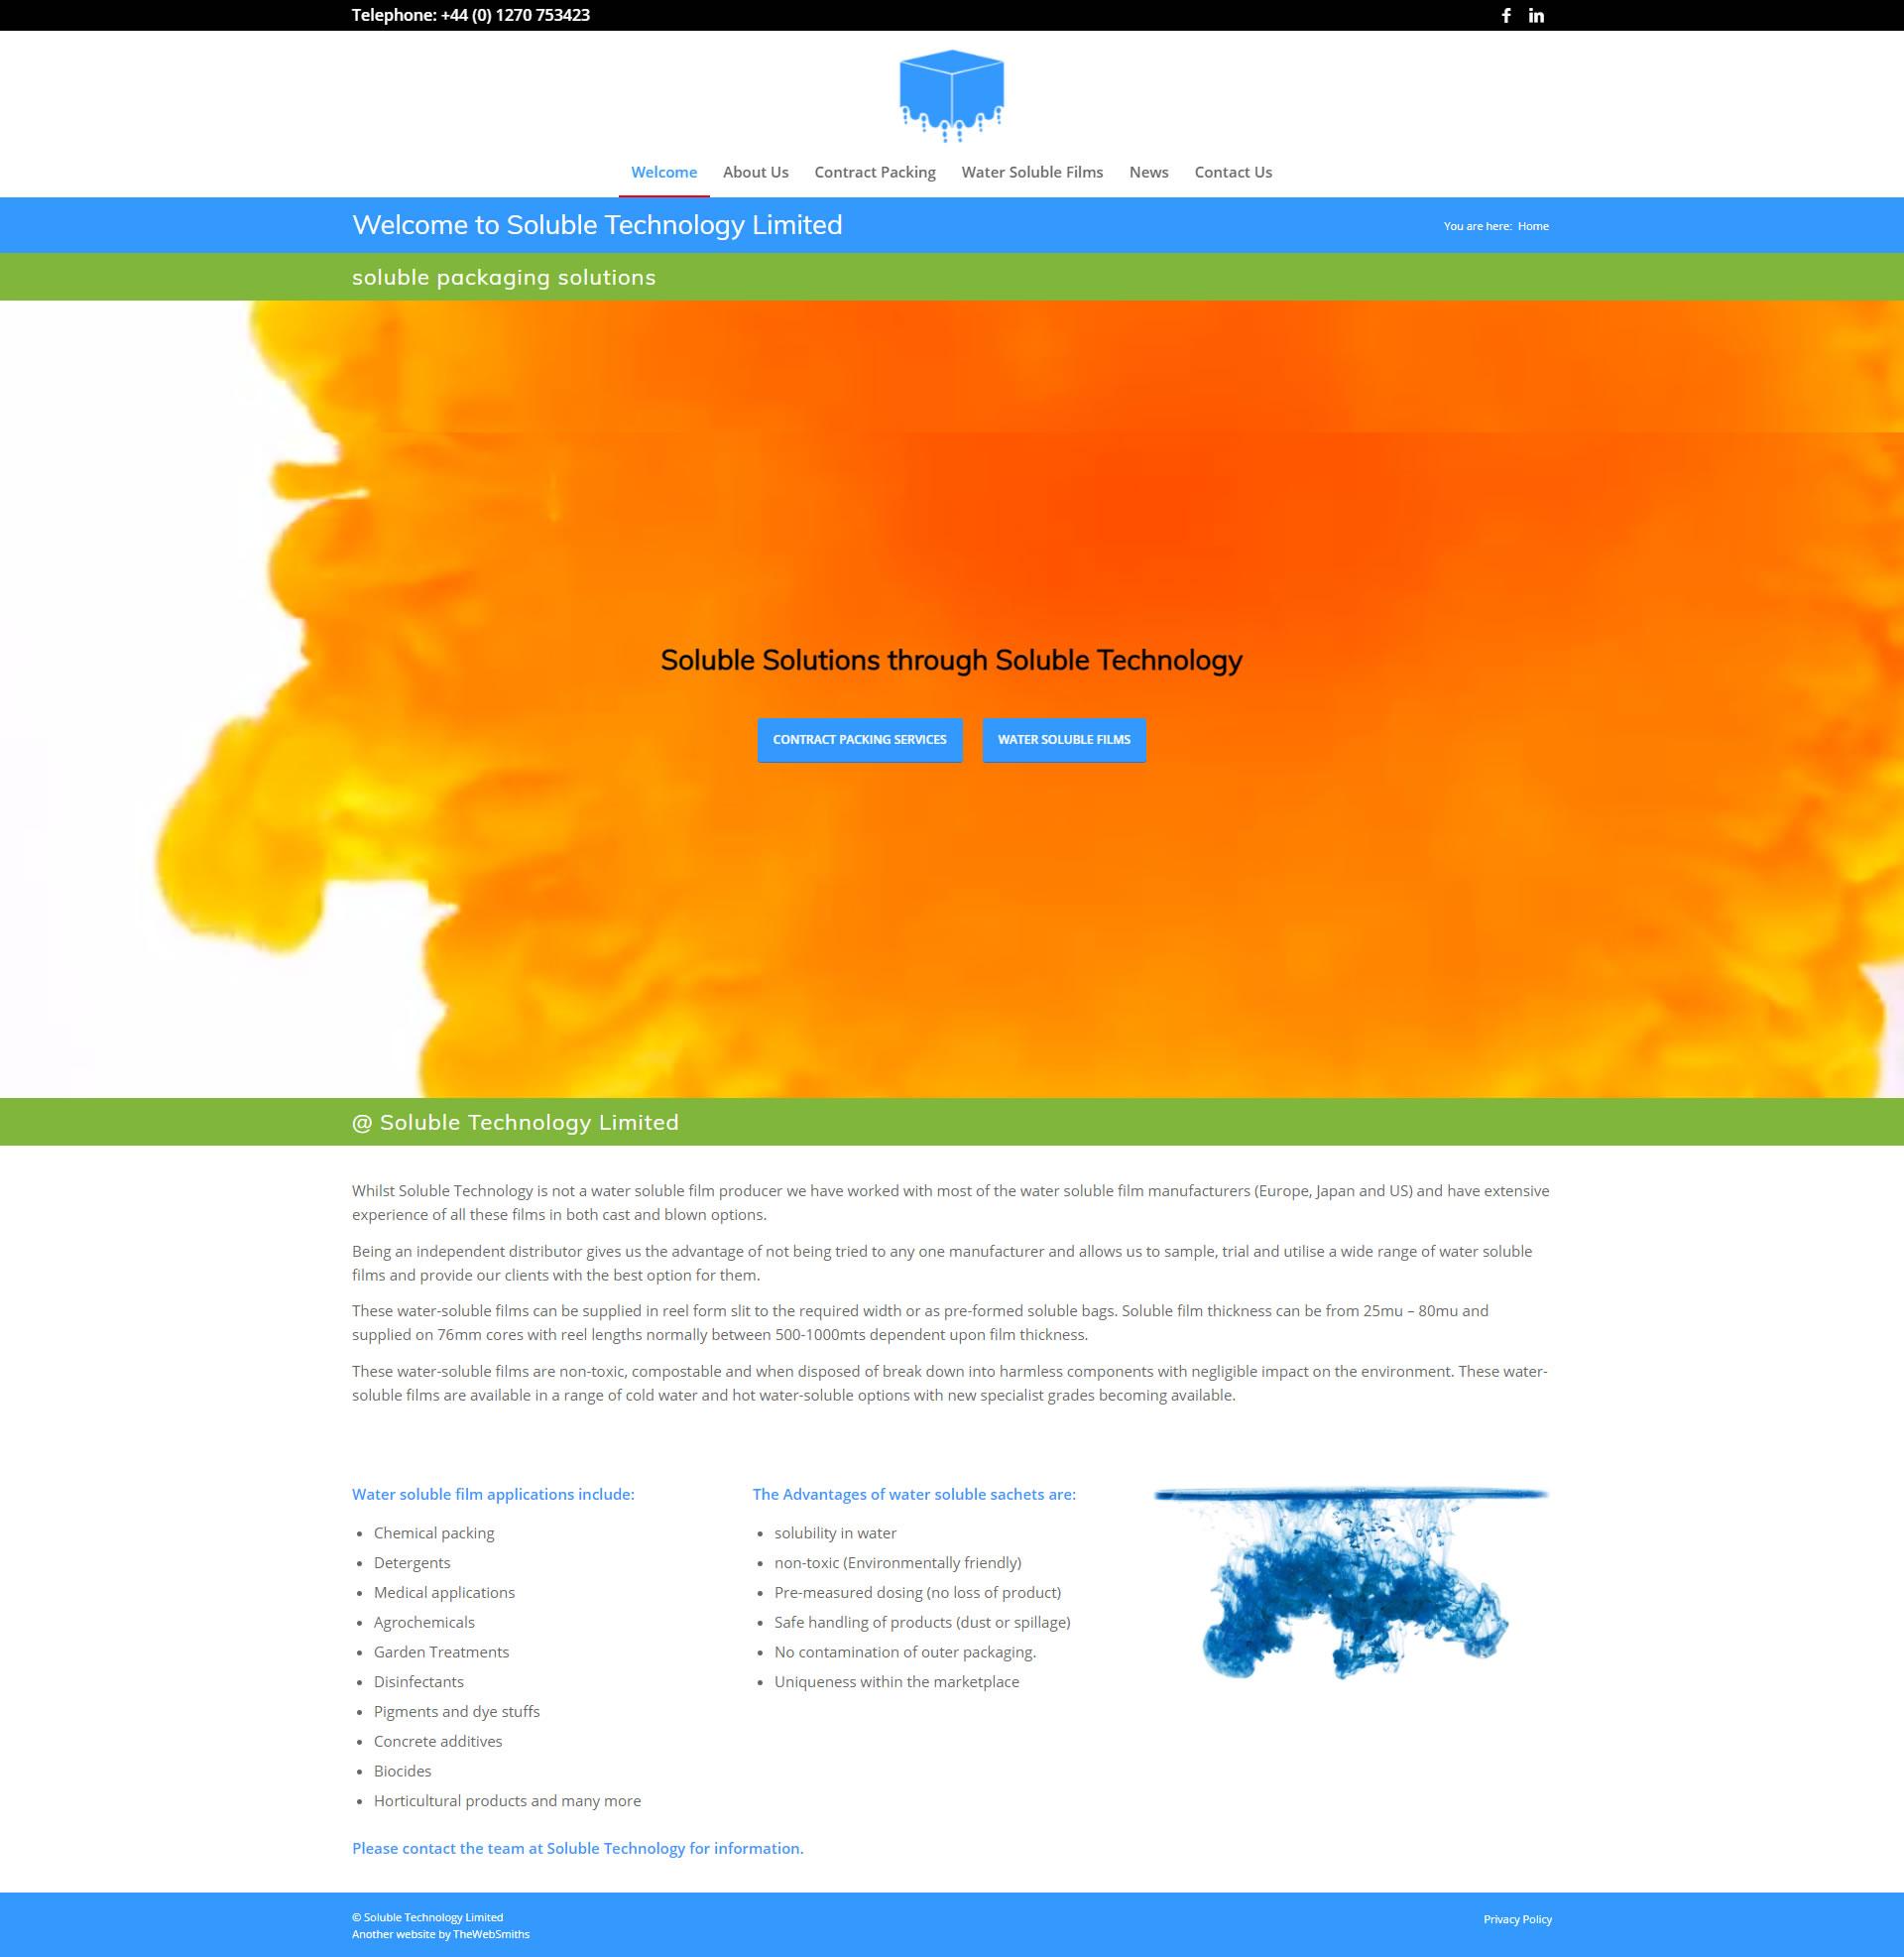 A new website for Soluble Technology